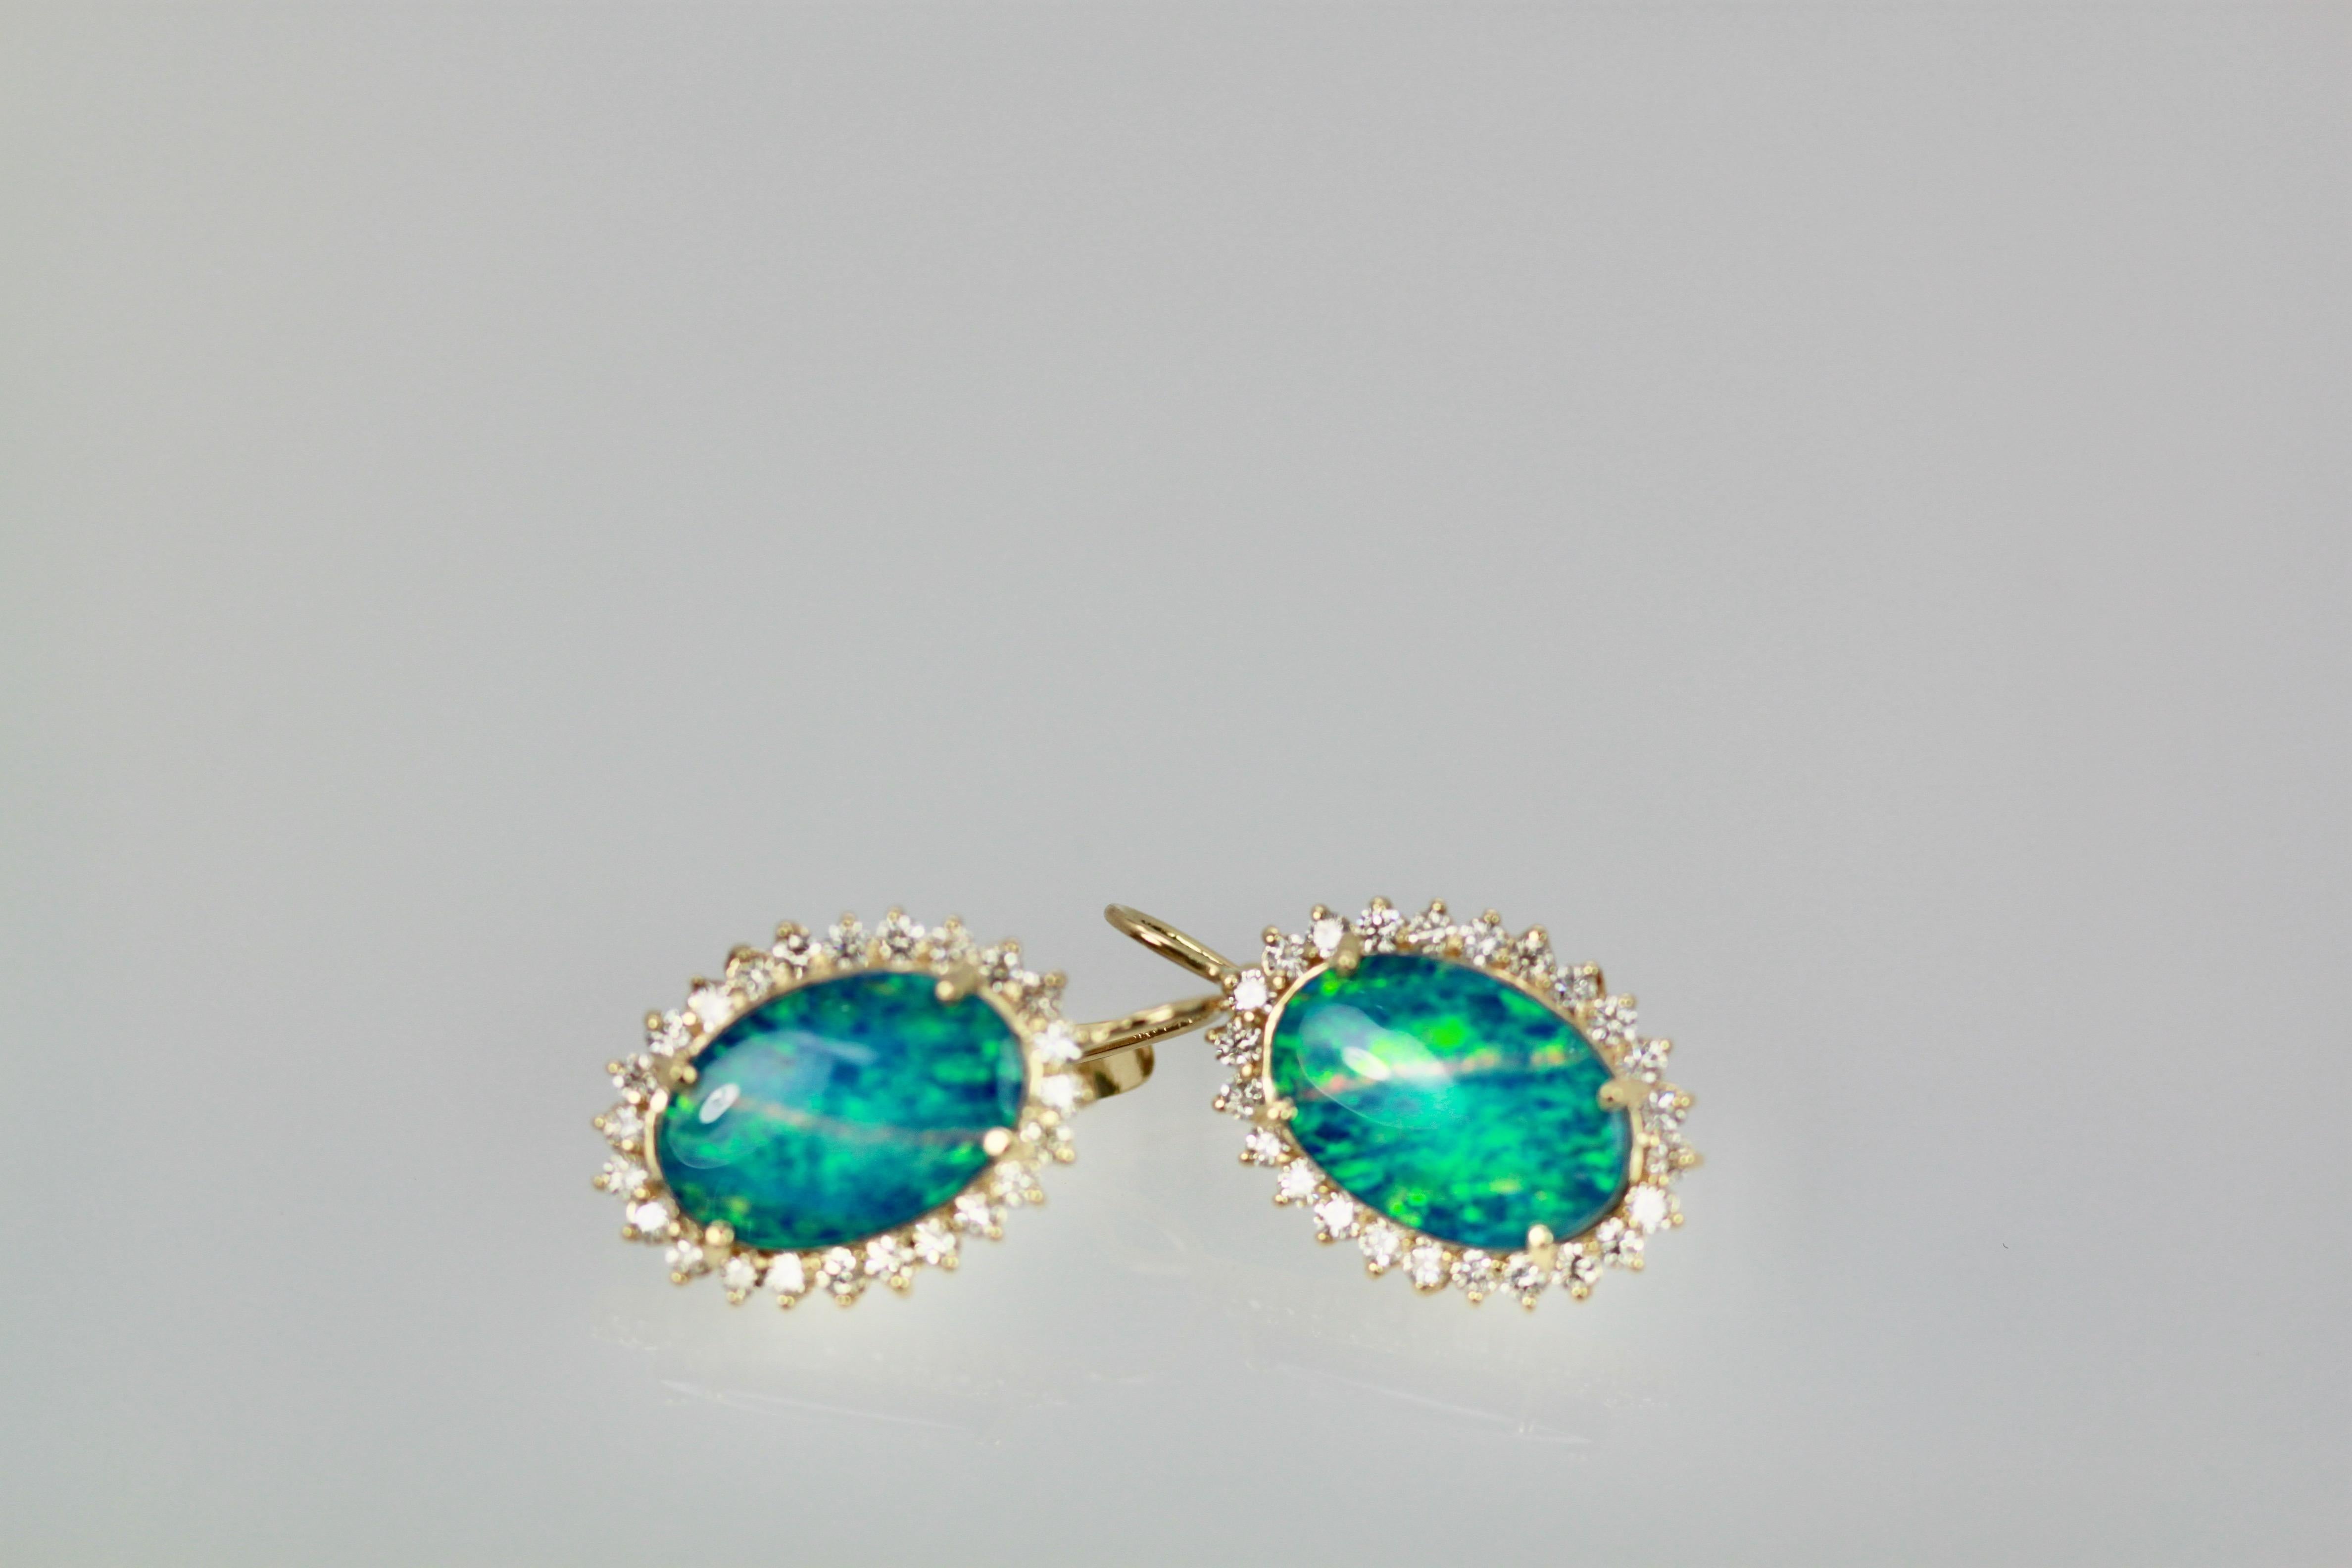 Black Opal Diamond Earrings 14 Karat Yellow Gold In Excellent Condition For Sale In North Hollywood, CA